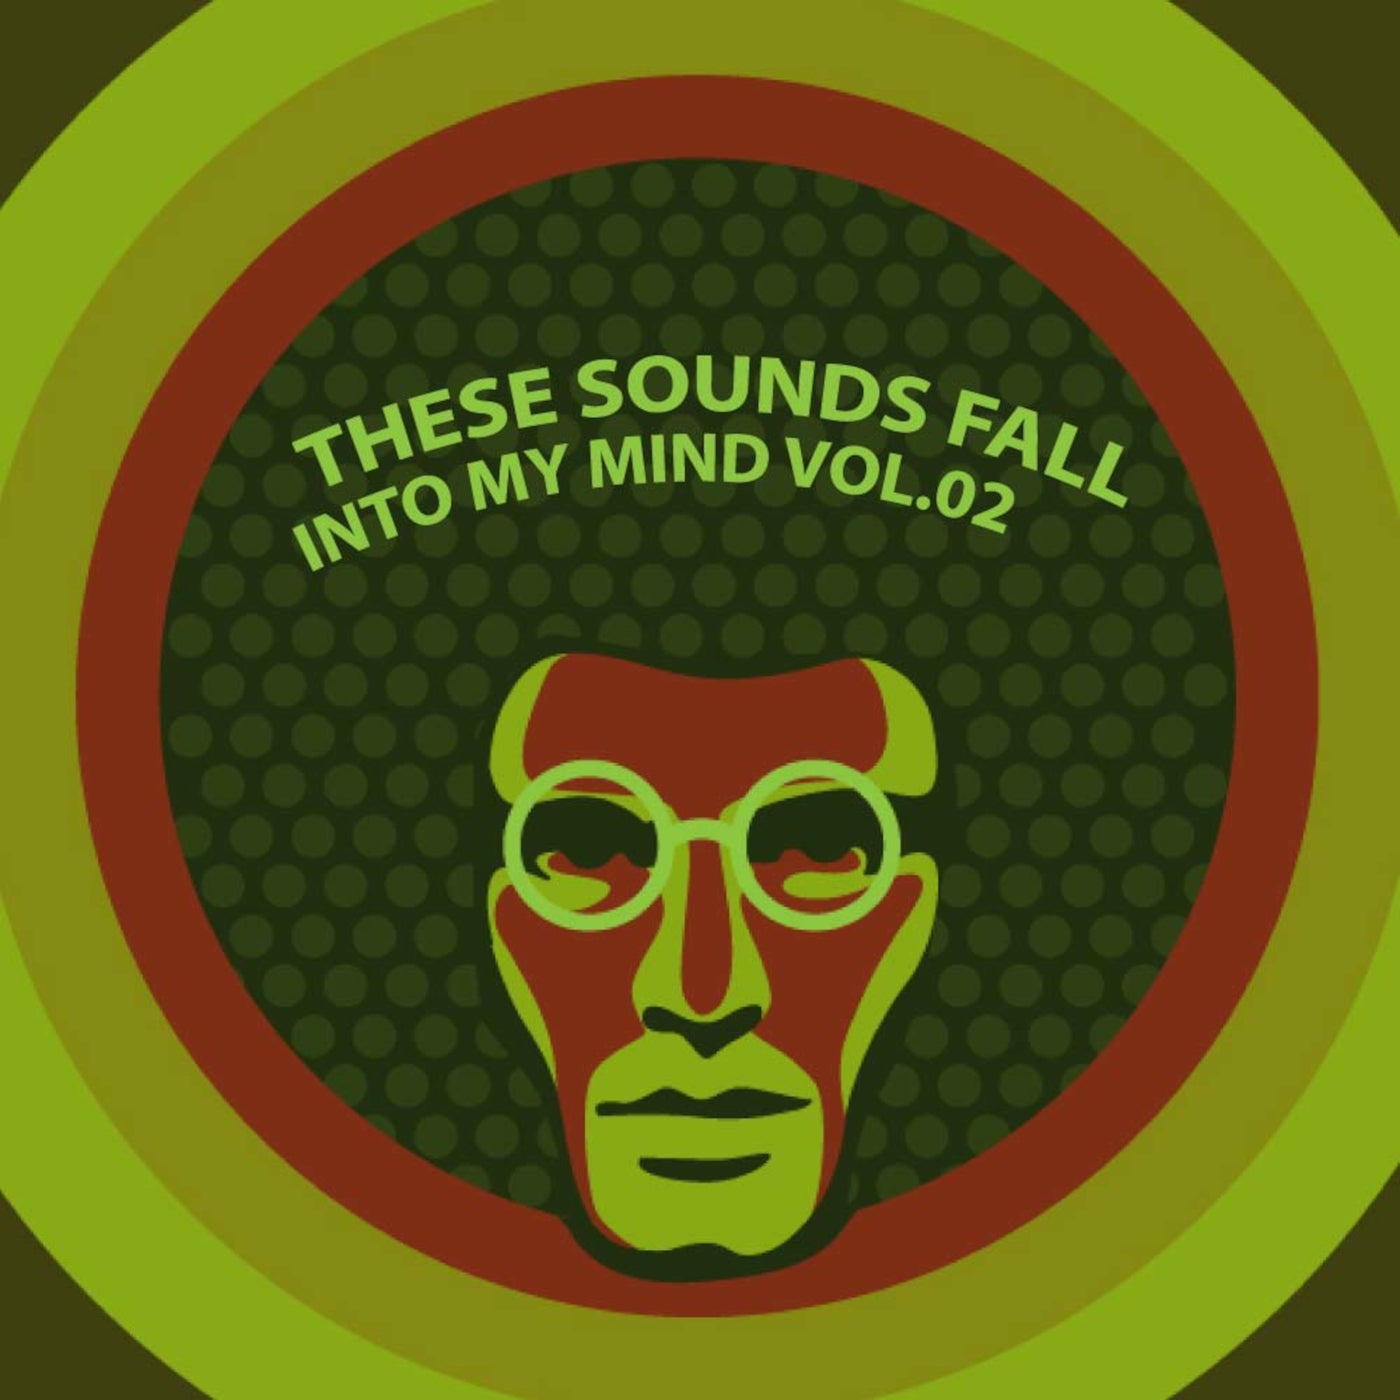 These Sounds Fall Into My Mind, Vol. 02